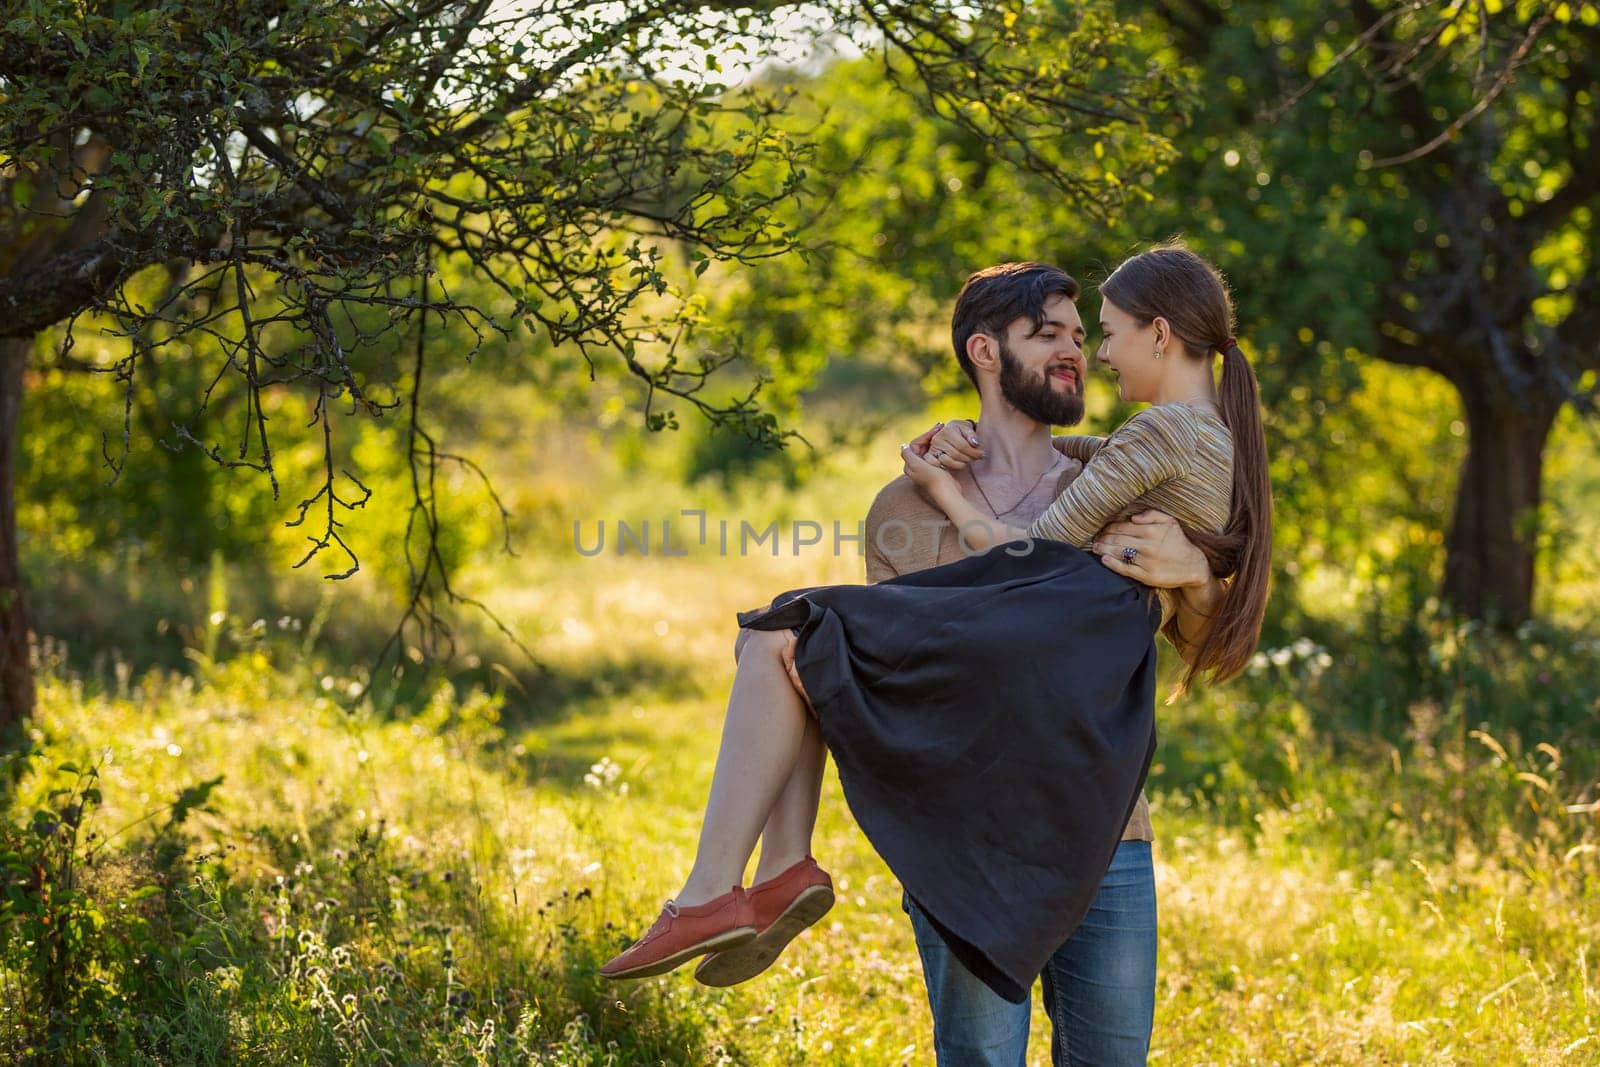 guy carries his girlfriend in his arms in a summer park